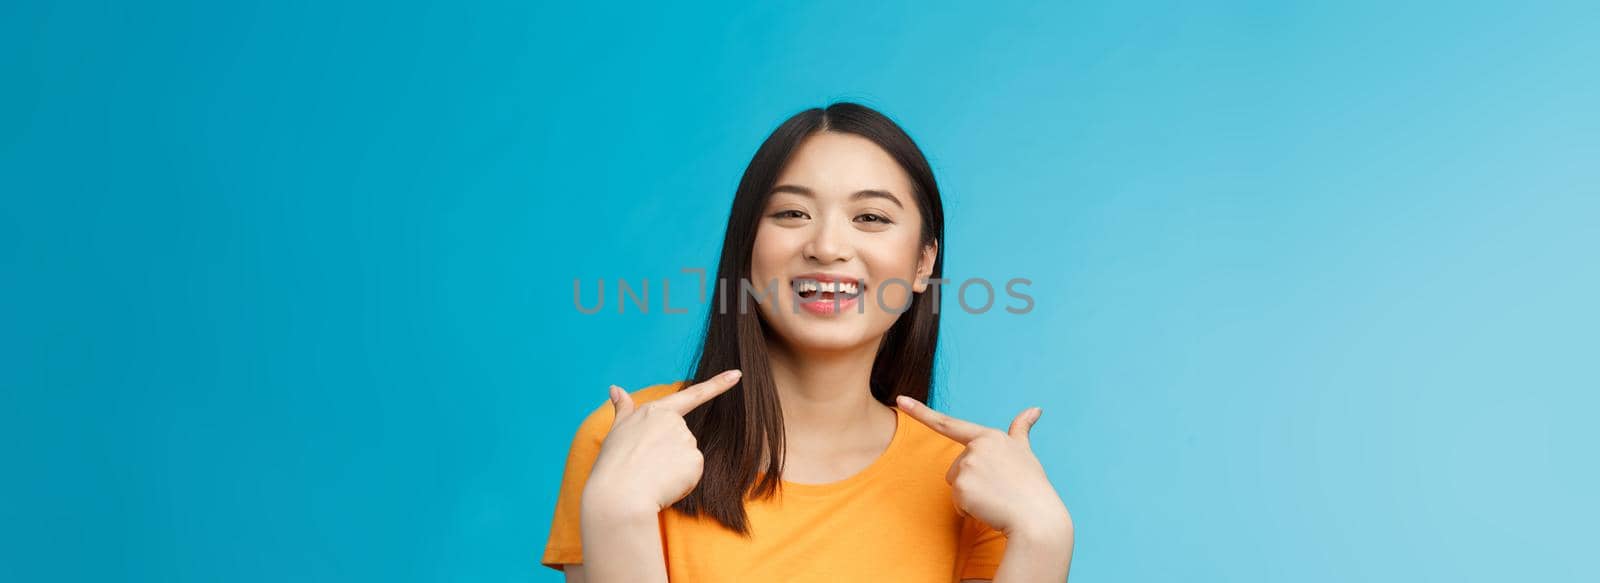 Close-up proud boastful cute asian girl telling story pointing herself, smiling broadly, bragging new haircut, standing pleased, delighted tell big news, stand blue background upbeat.